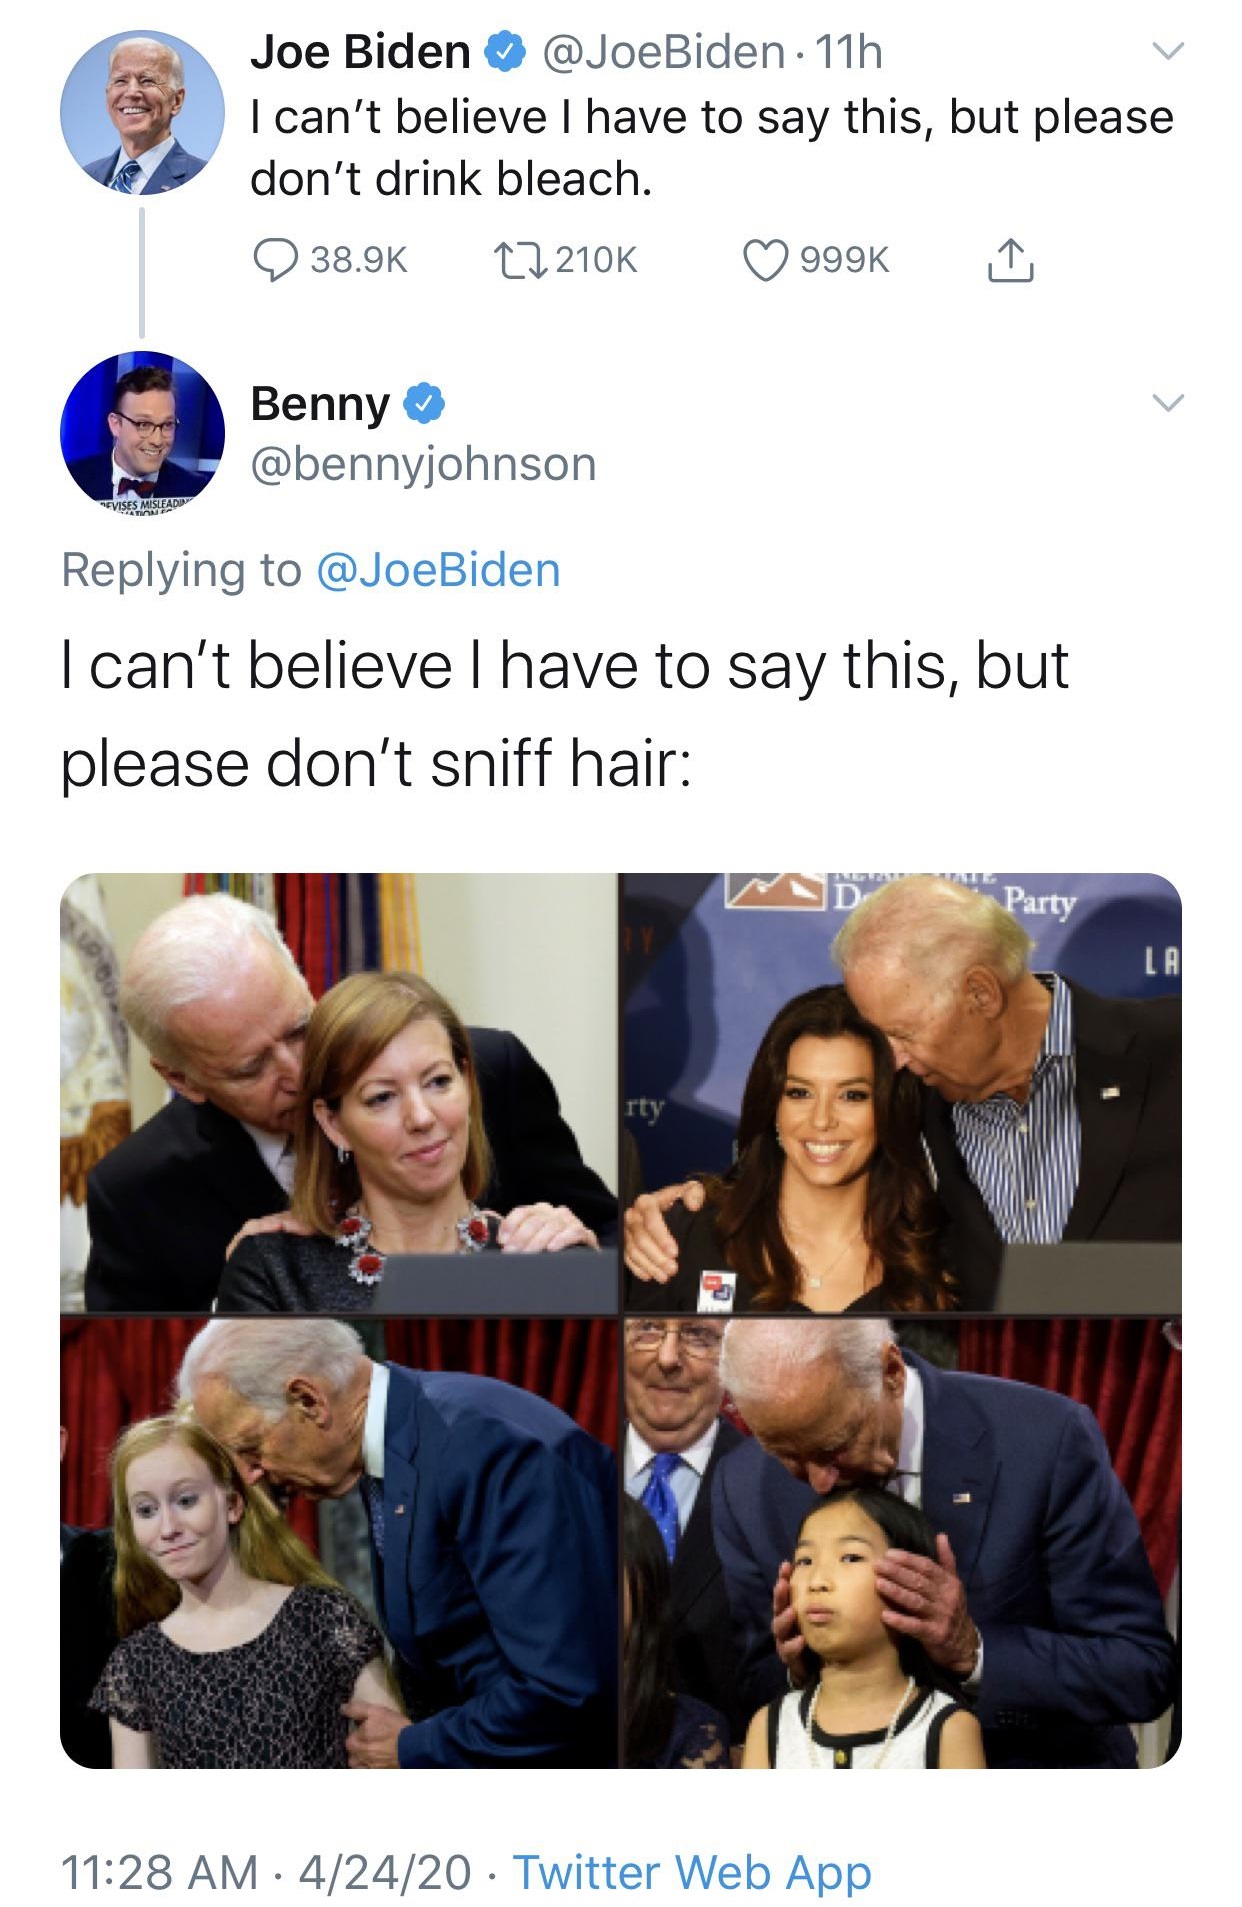 joe biden sniffing people - Joe Biden 11h I can't believe I have to say this, but please don't drink bleach. 1 Benny I can't believe I have to say this, but please don't sniff hair 42420 Twitter Web App